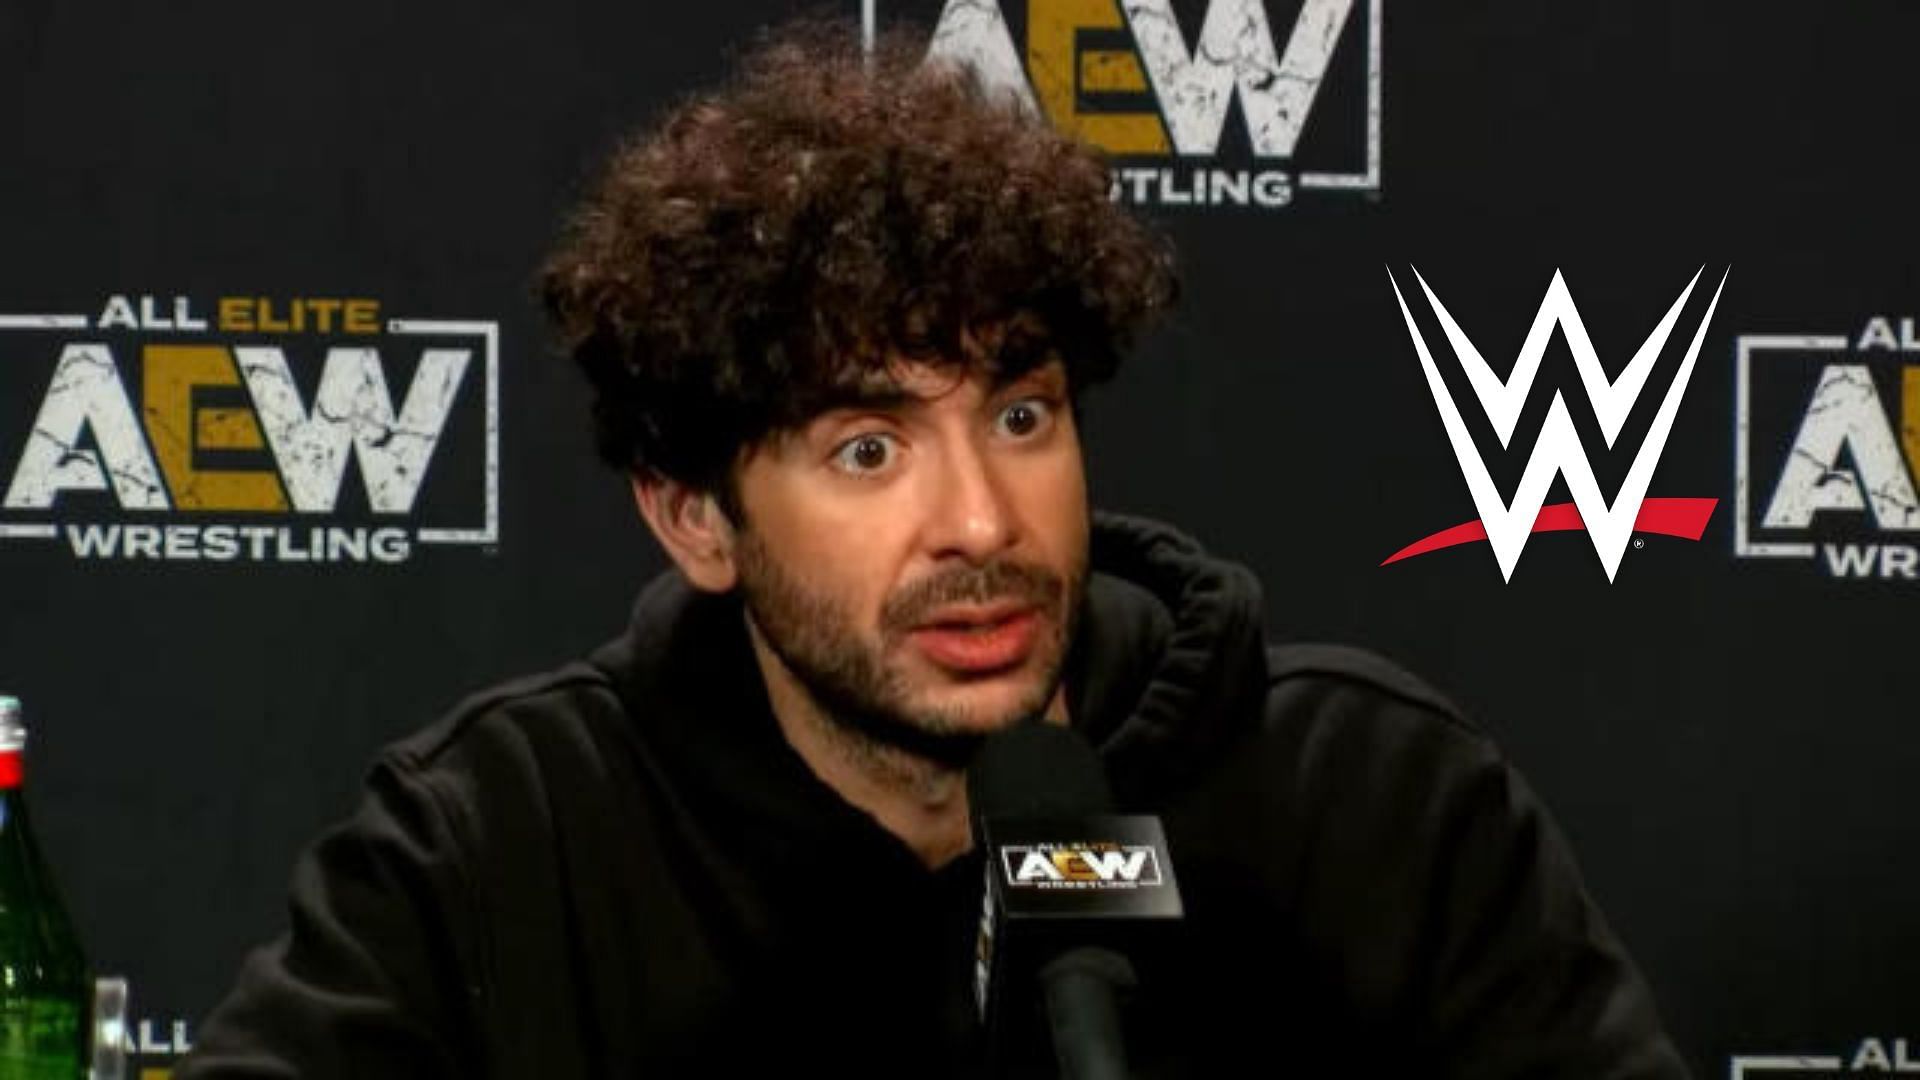 Tony Khan is the CEO and president of AEW